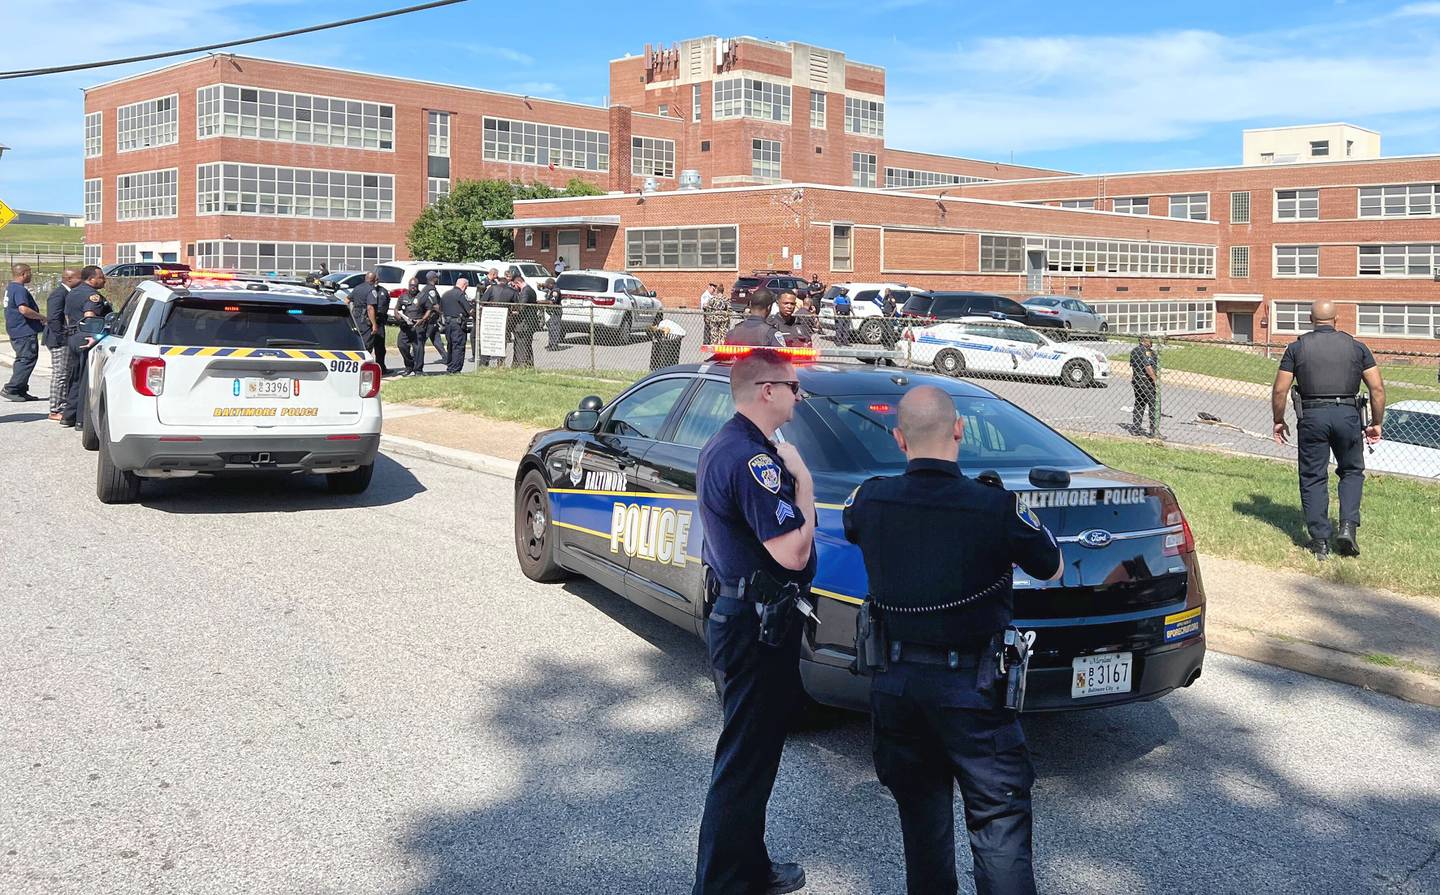 A major police presence at Mergenthaler vocational high school following a reported shooting.